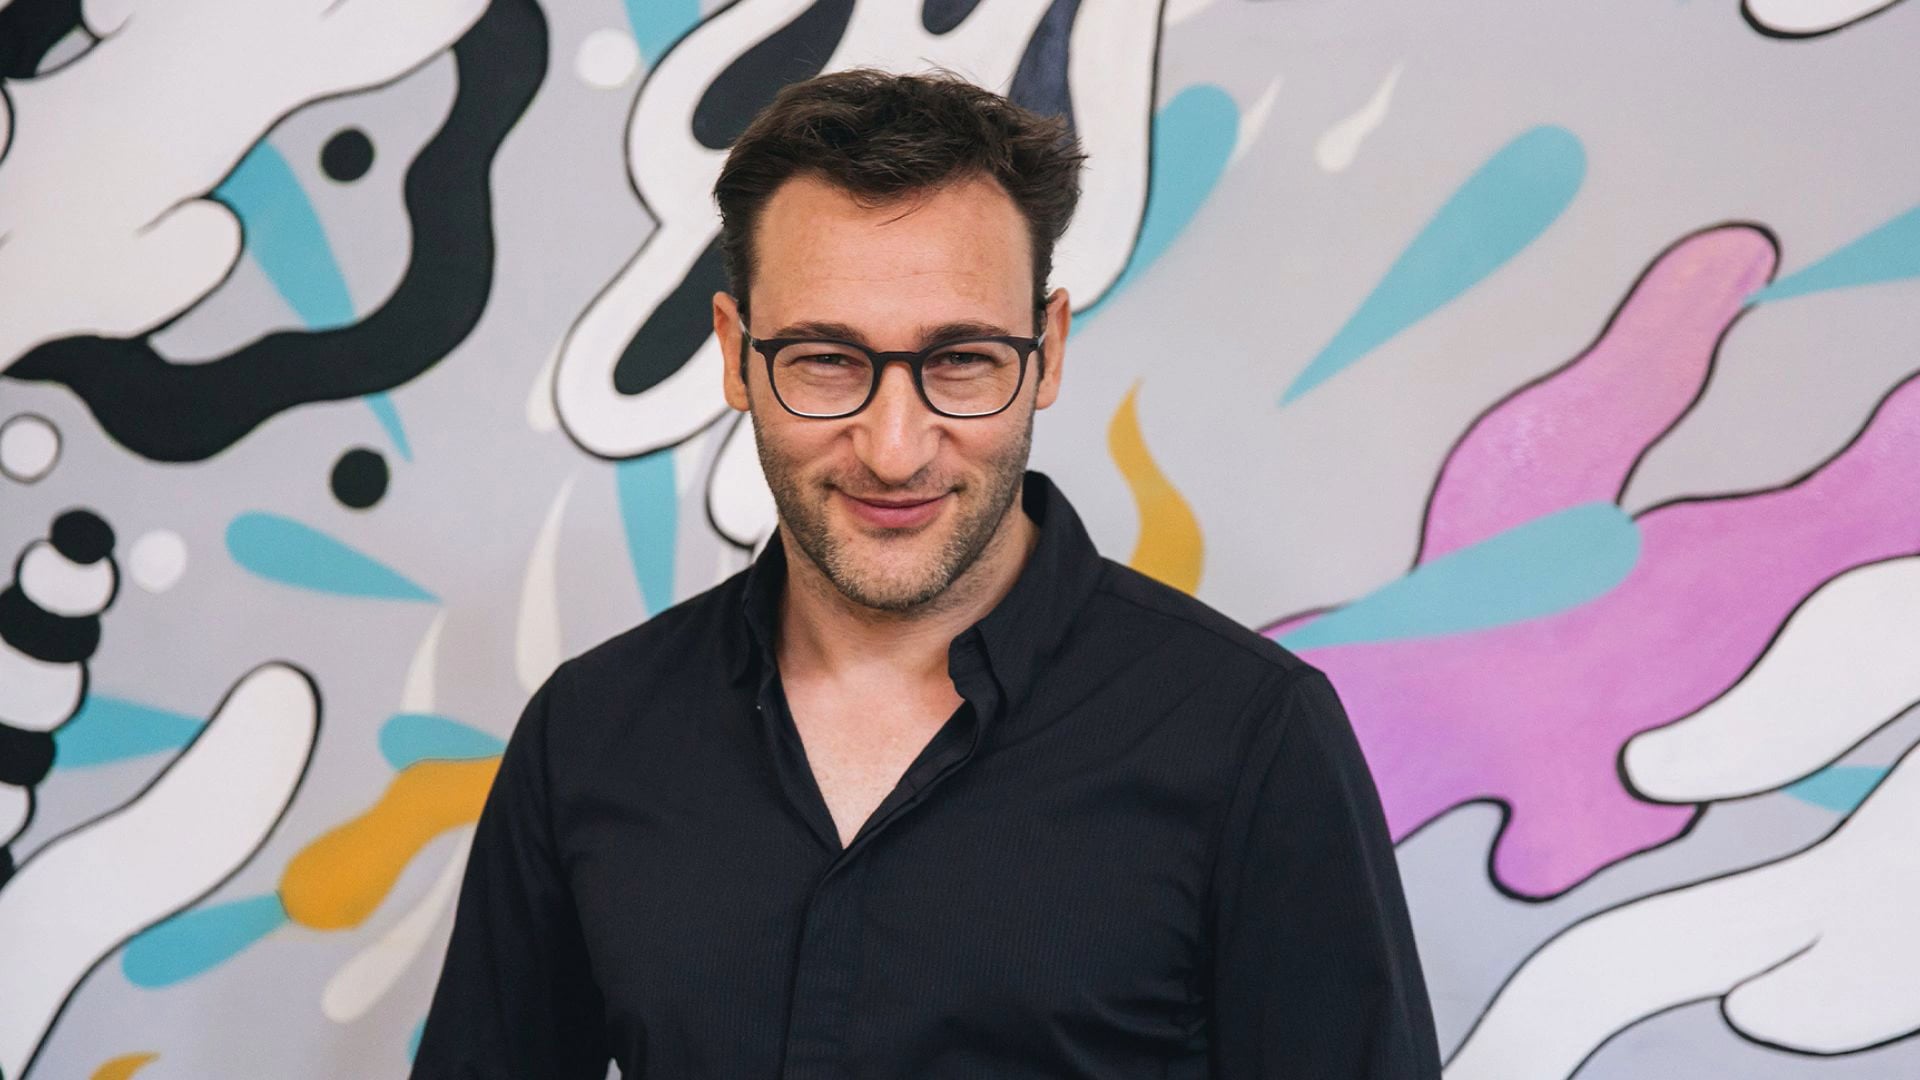 a man wearing glasses standing in front of a colorful wall.